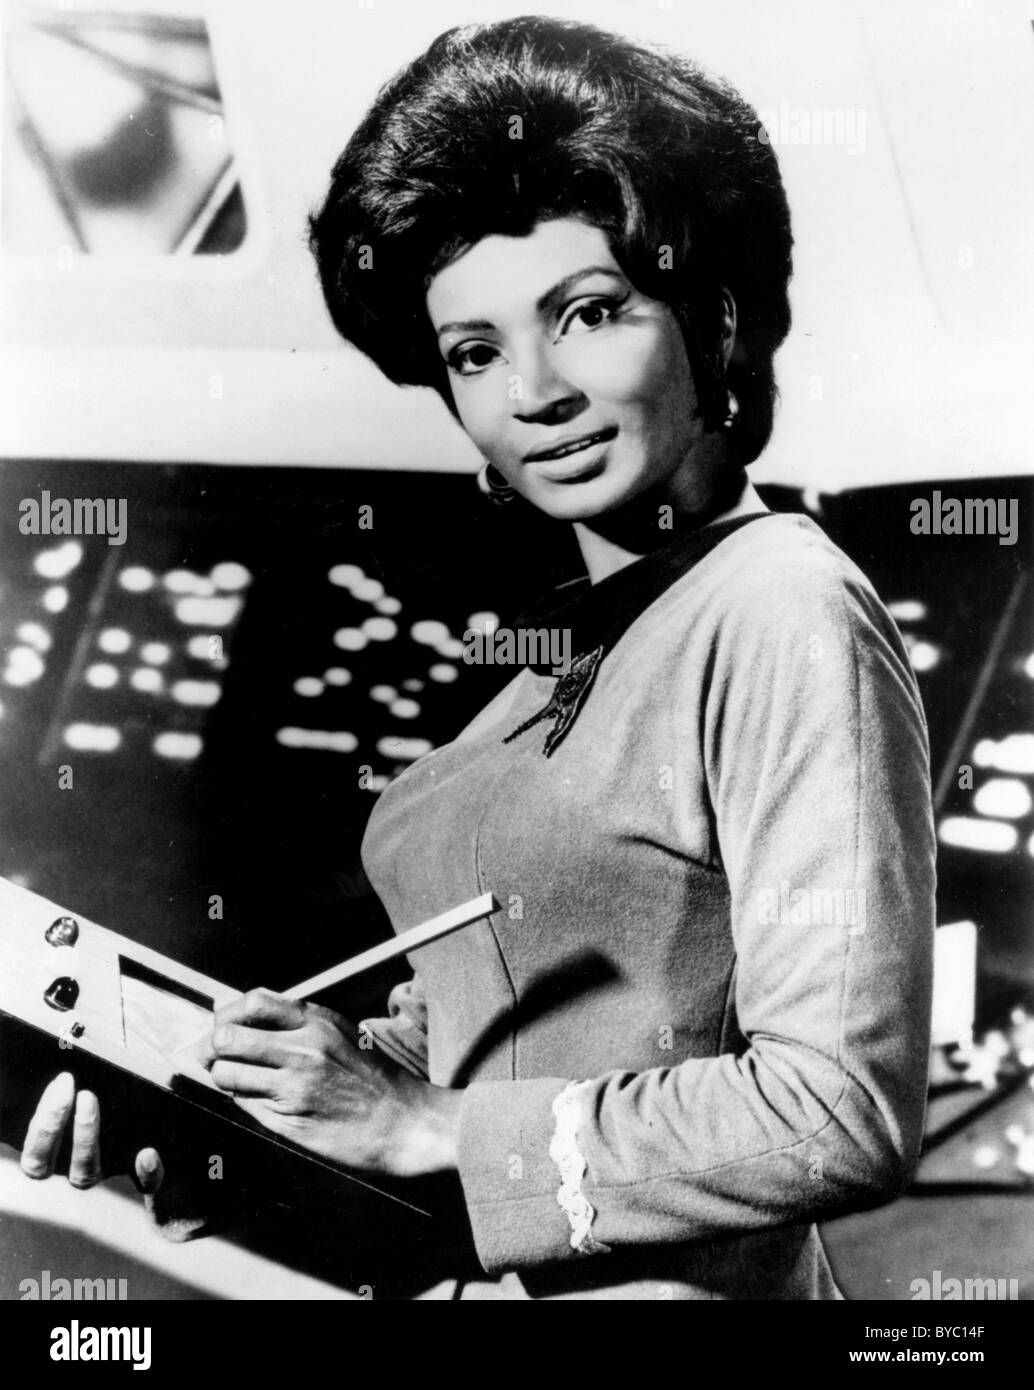 Uhura on Star Trek. From the 1970's until the late 1980's, NASA employed Nichelle Nichols to recruit new astronaut candidates. Stock Photo